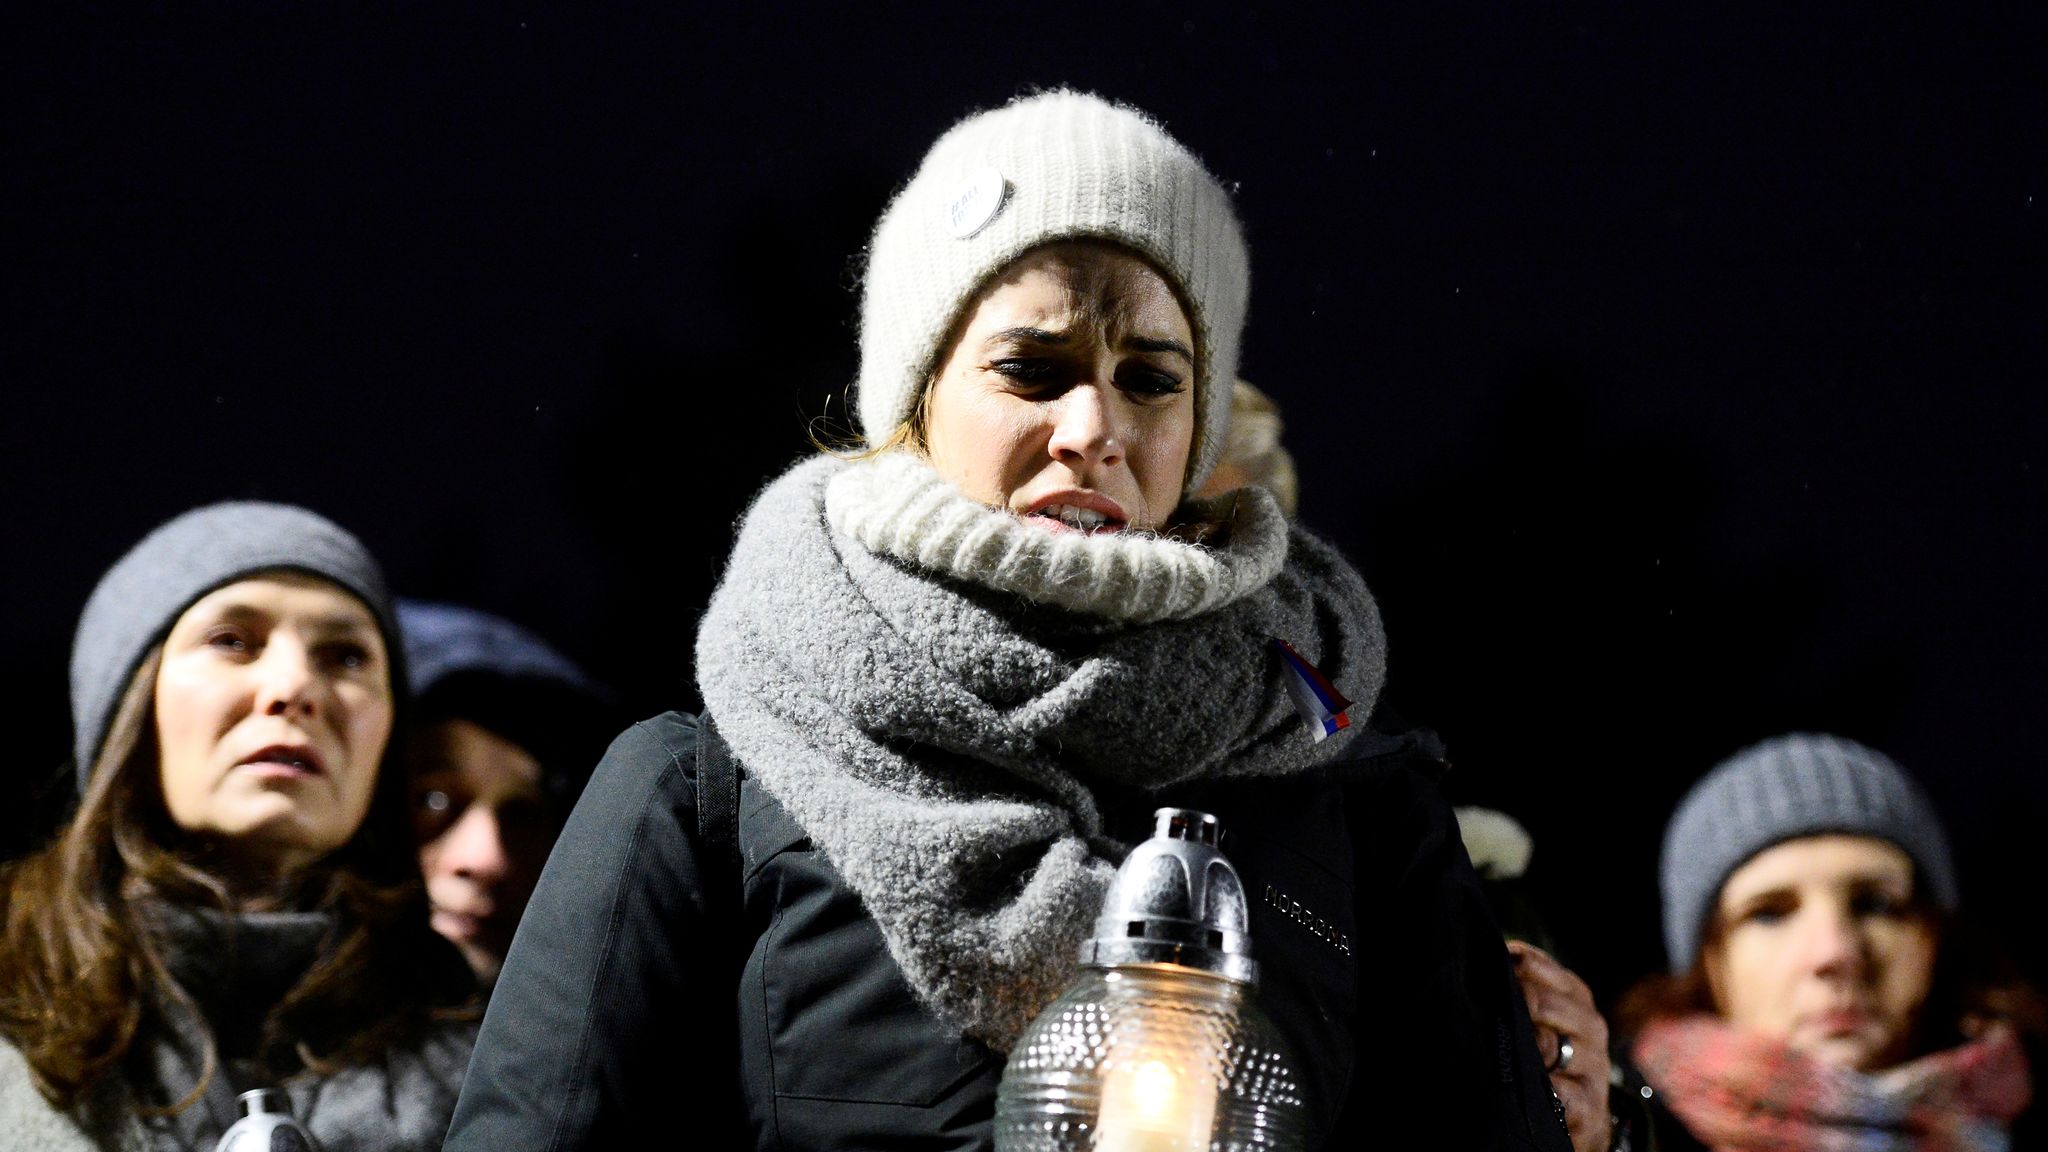 Mafia Get Out Thousands Protests In Slovakia Over Killing Of